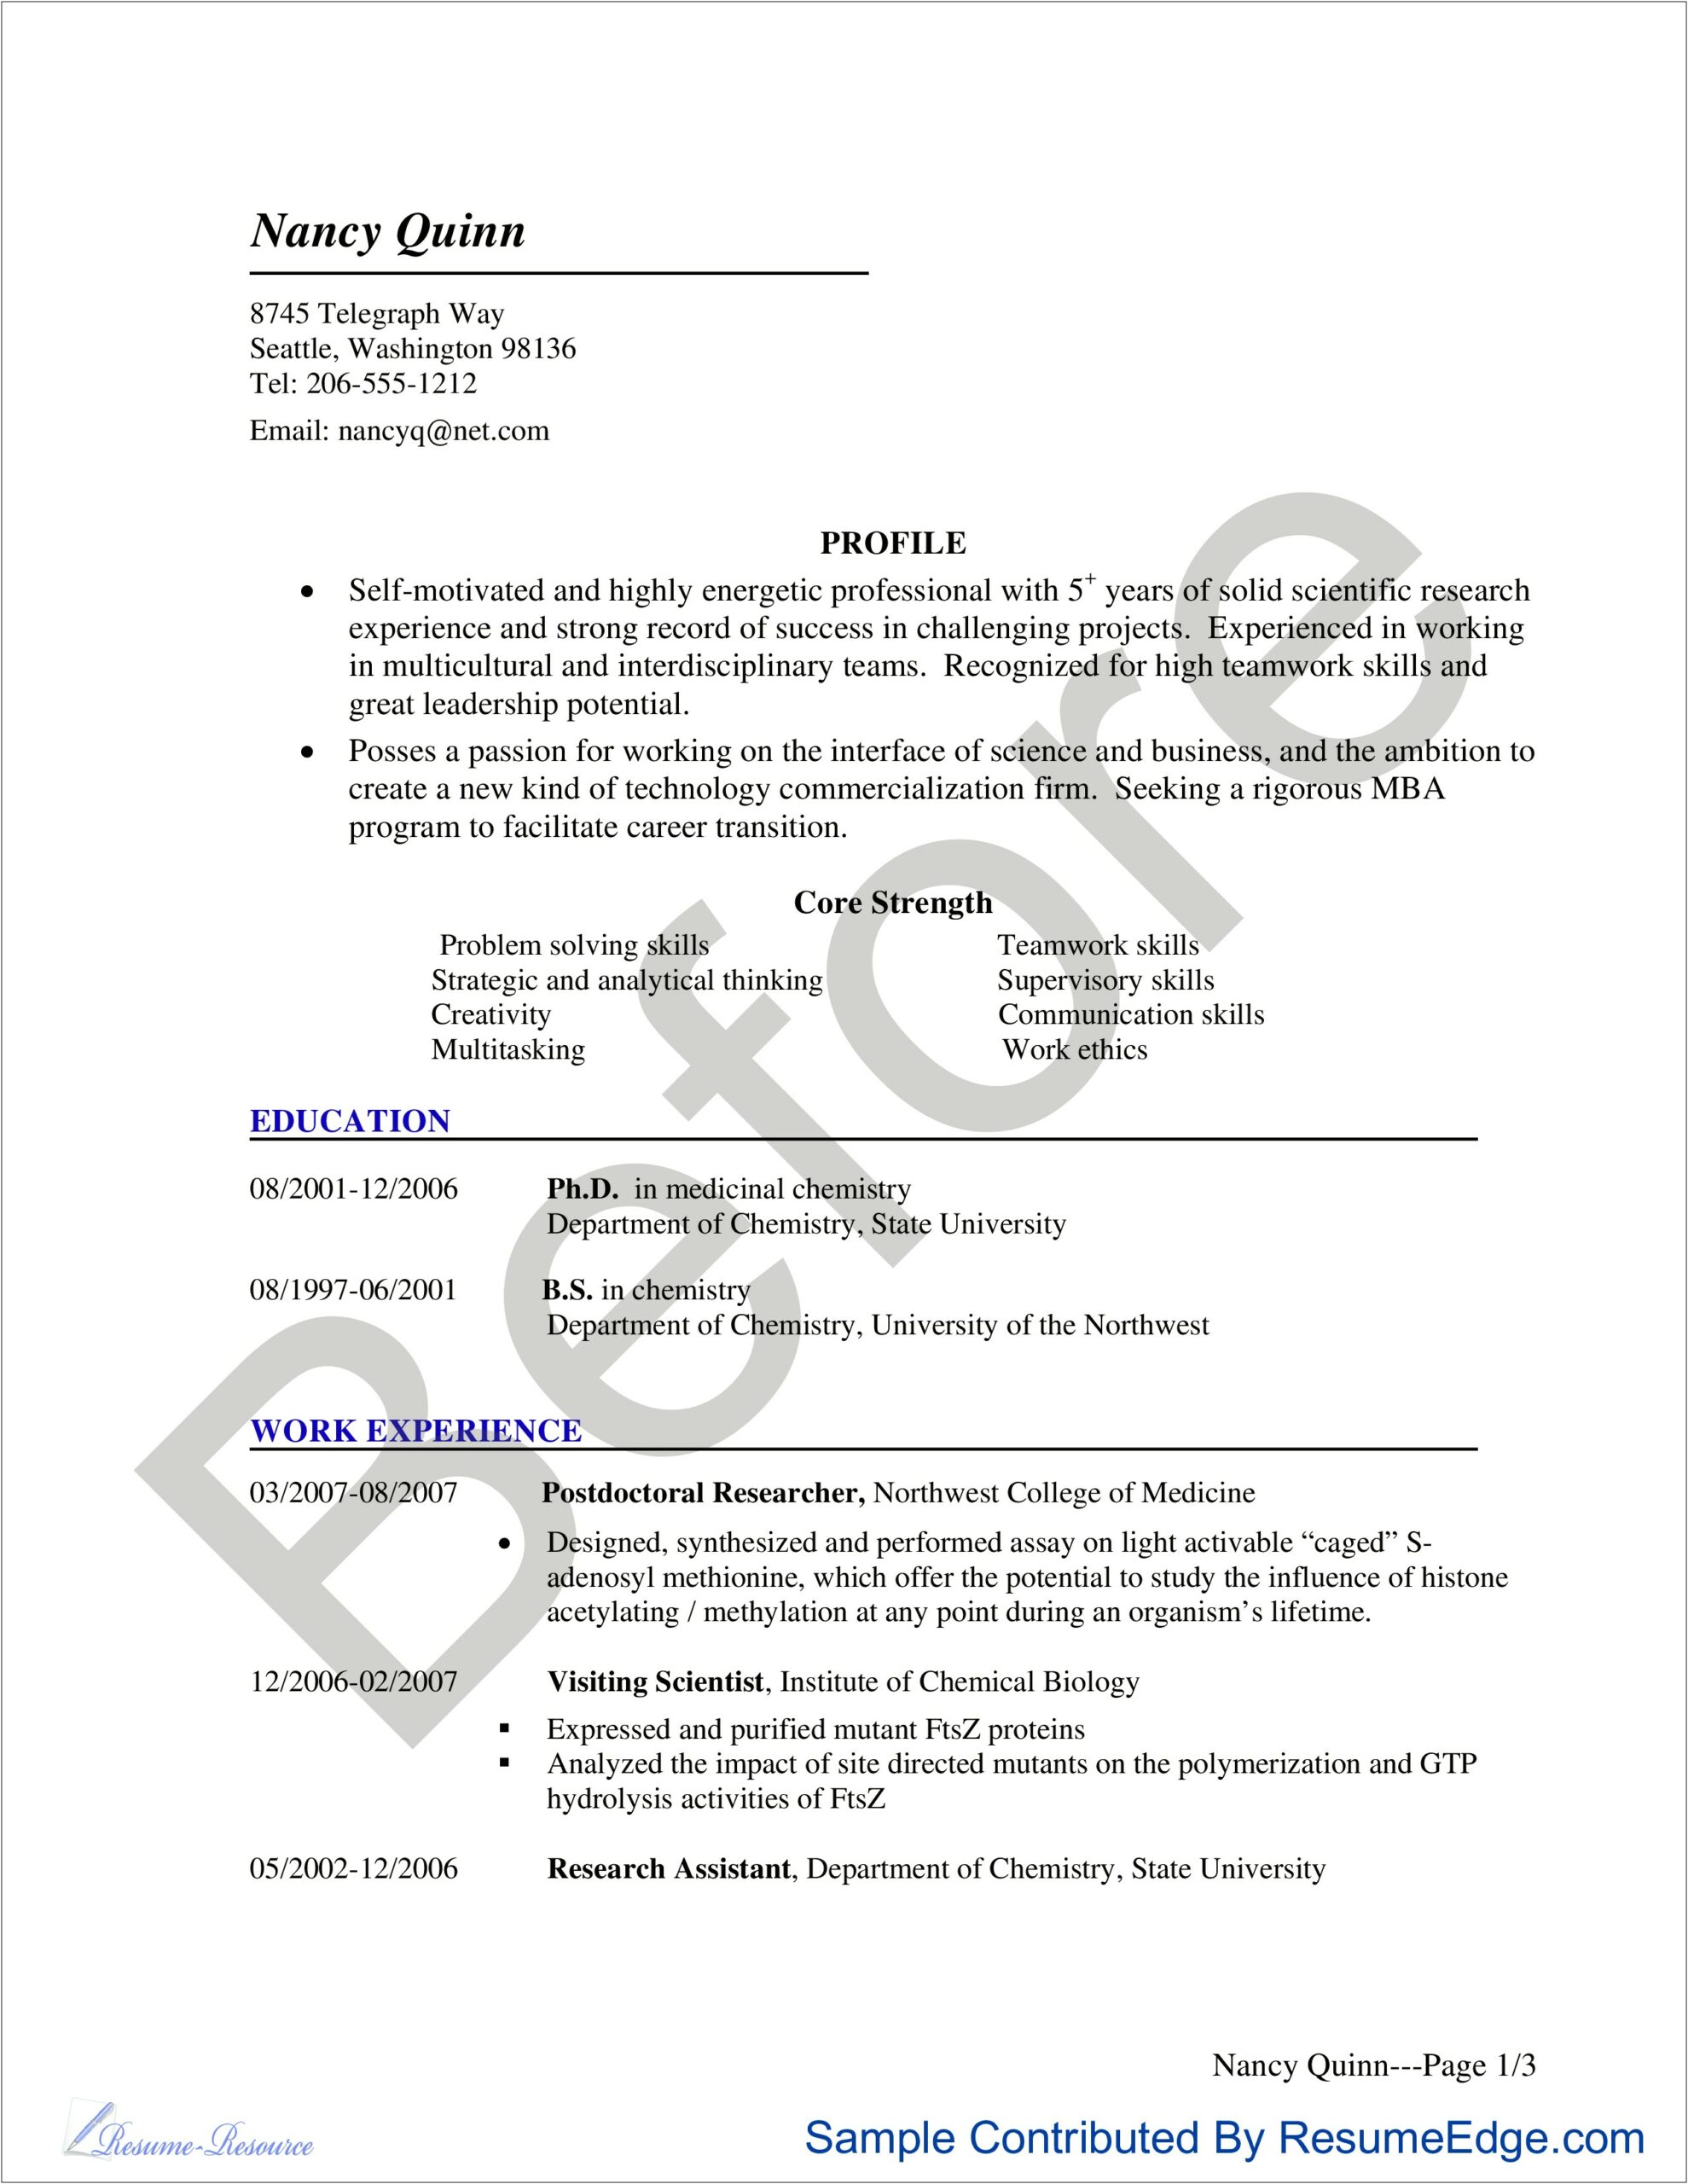 Do You Need Resume For Grad School